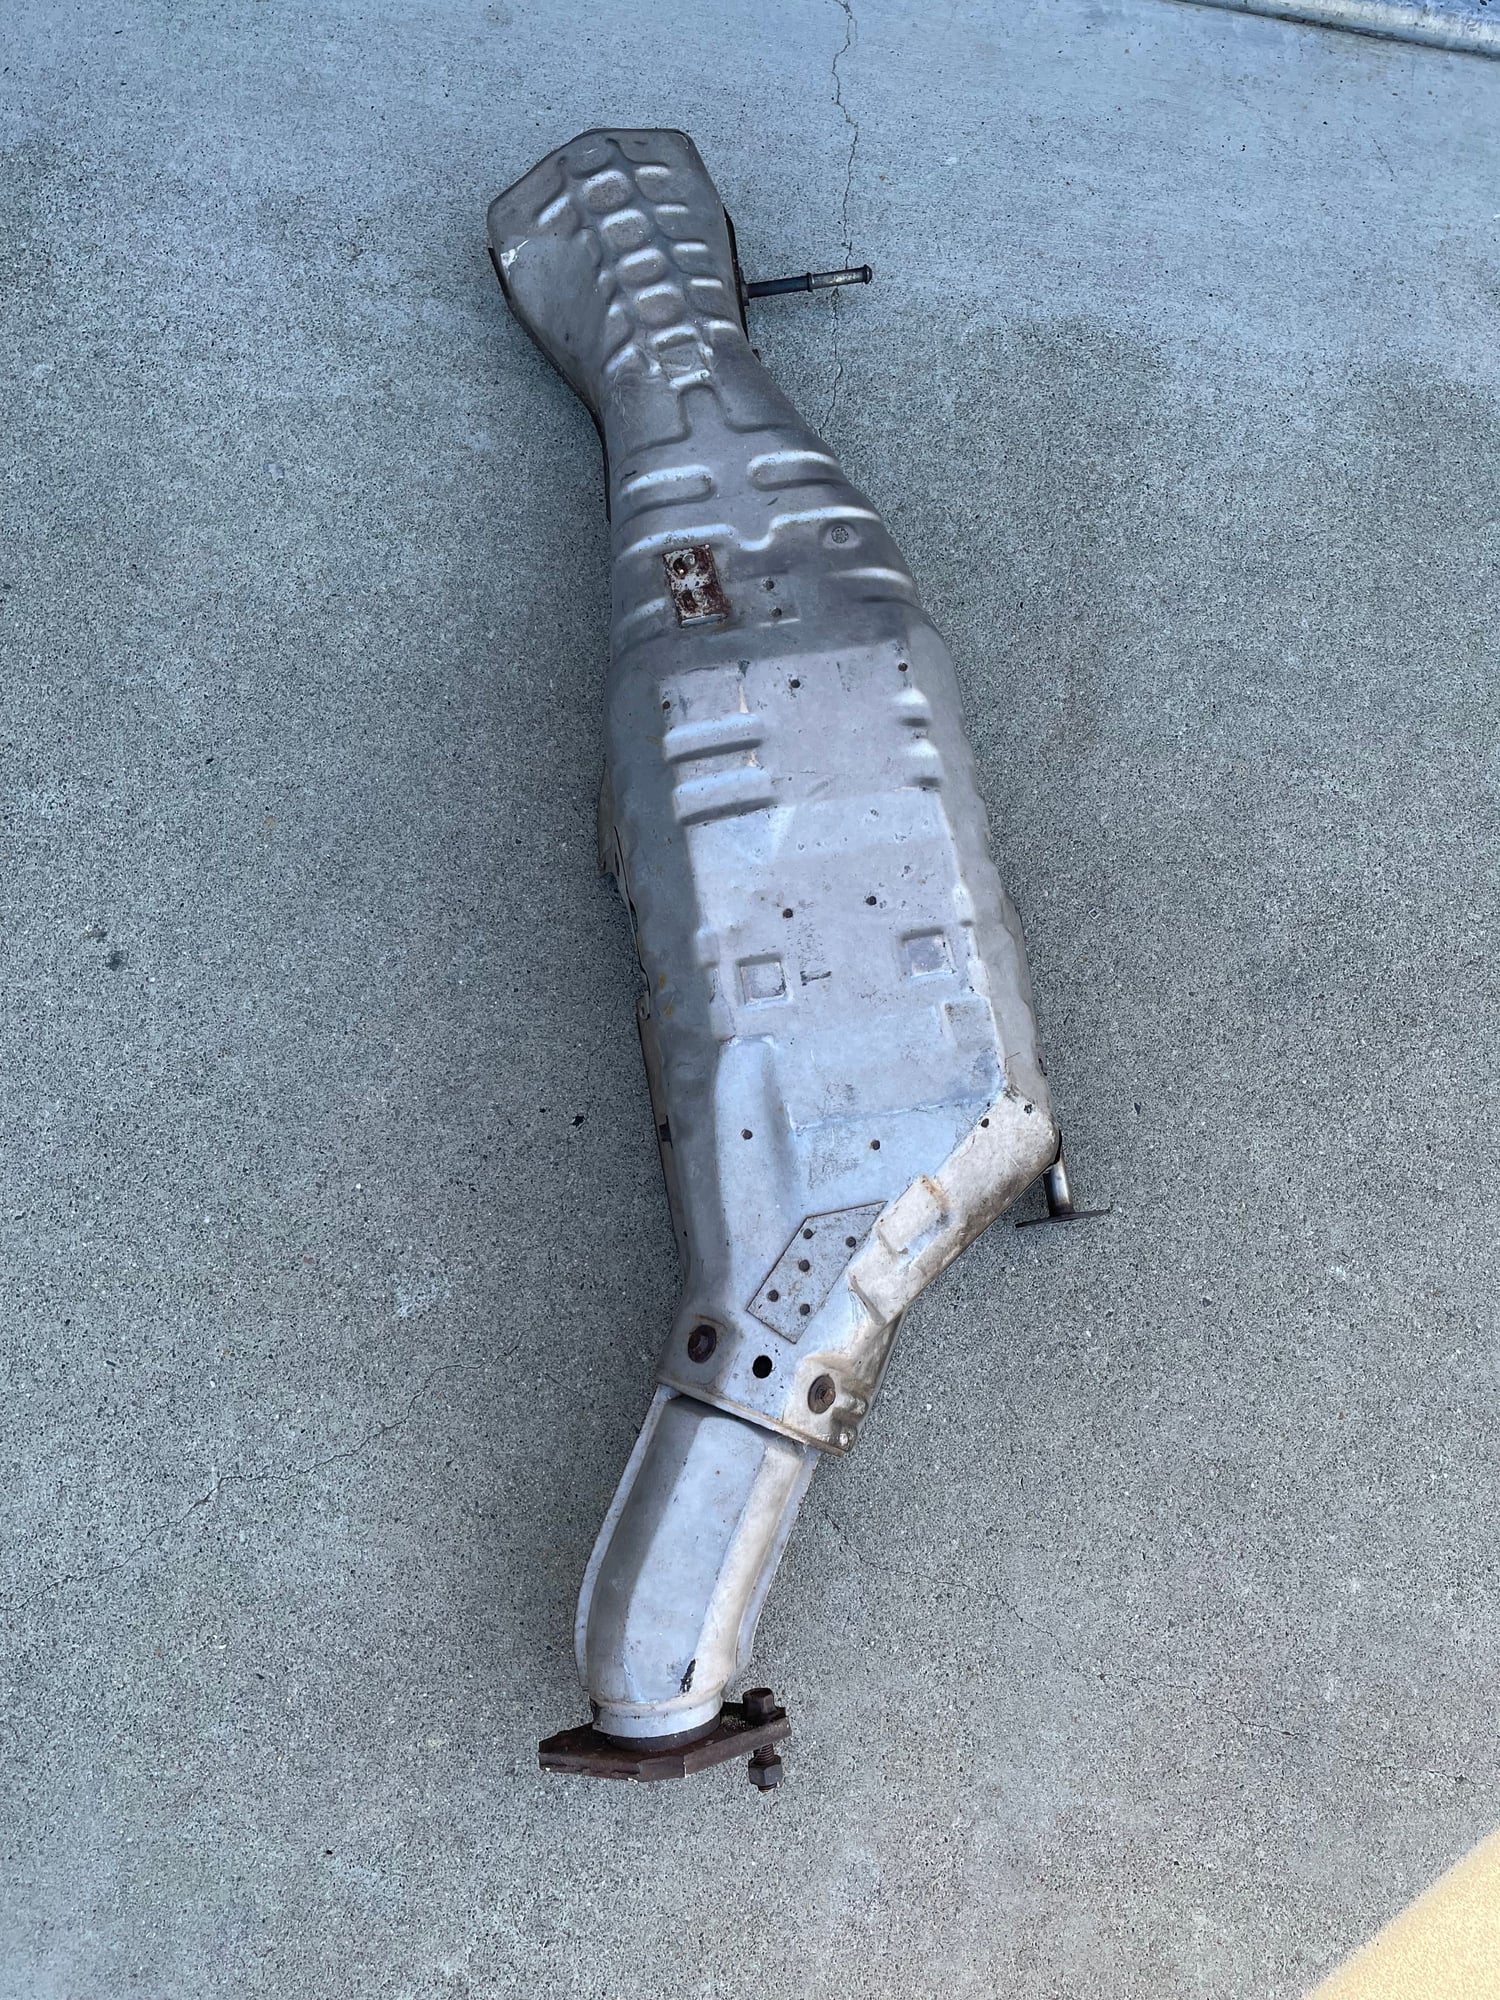 Engine - Exhaust - OEM FD catalytic Converter - Used - 1993 to 1995 Mazda RX-7 - Vacaville, CA 95688, United States